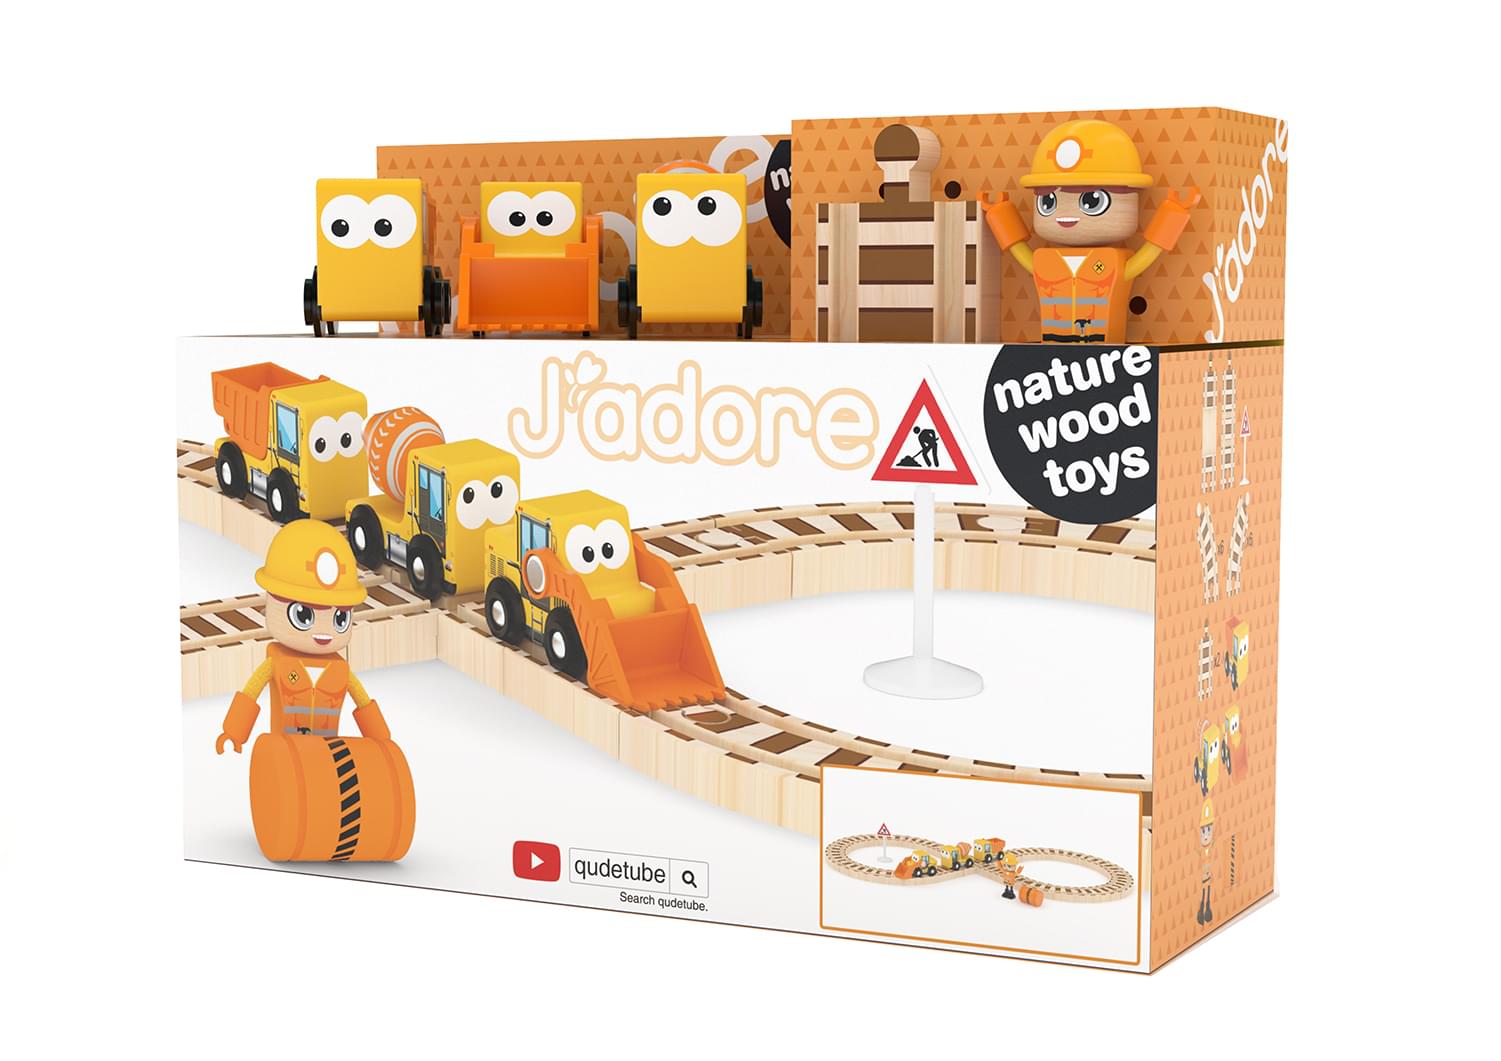 J'adore Construction Train and Rail Wooden Toy Playset with Figure